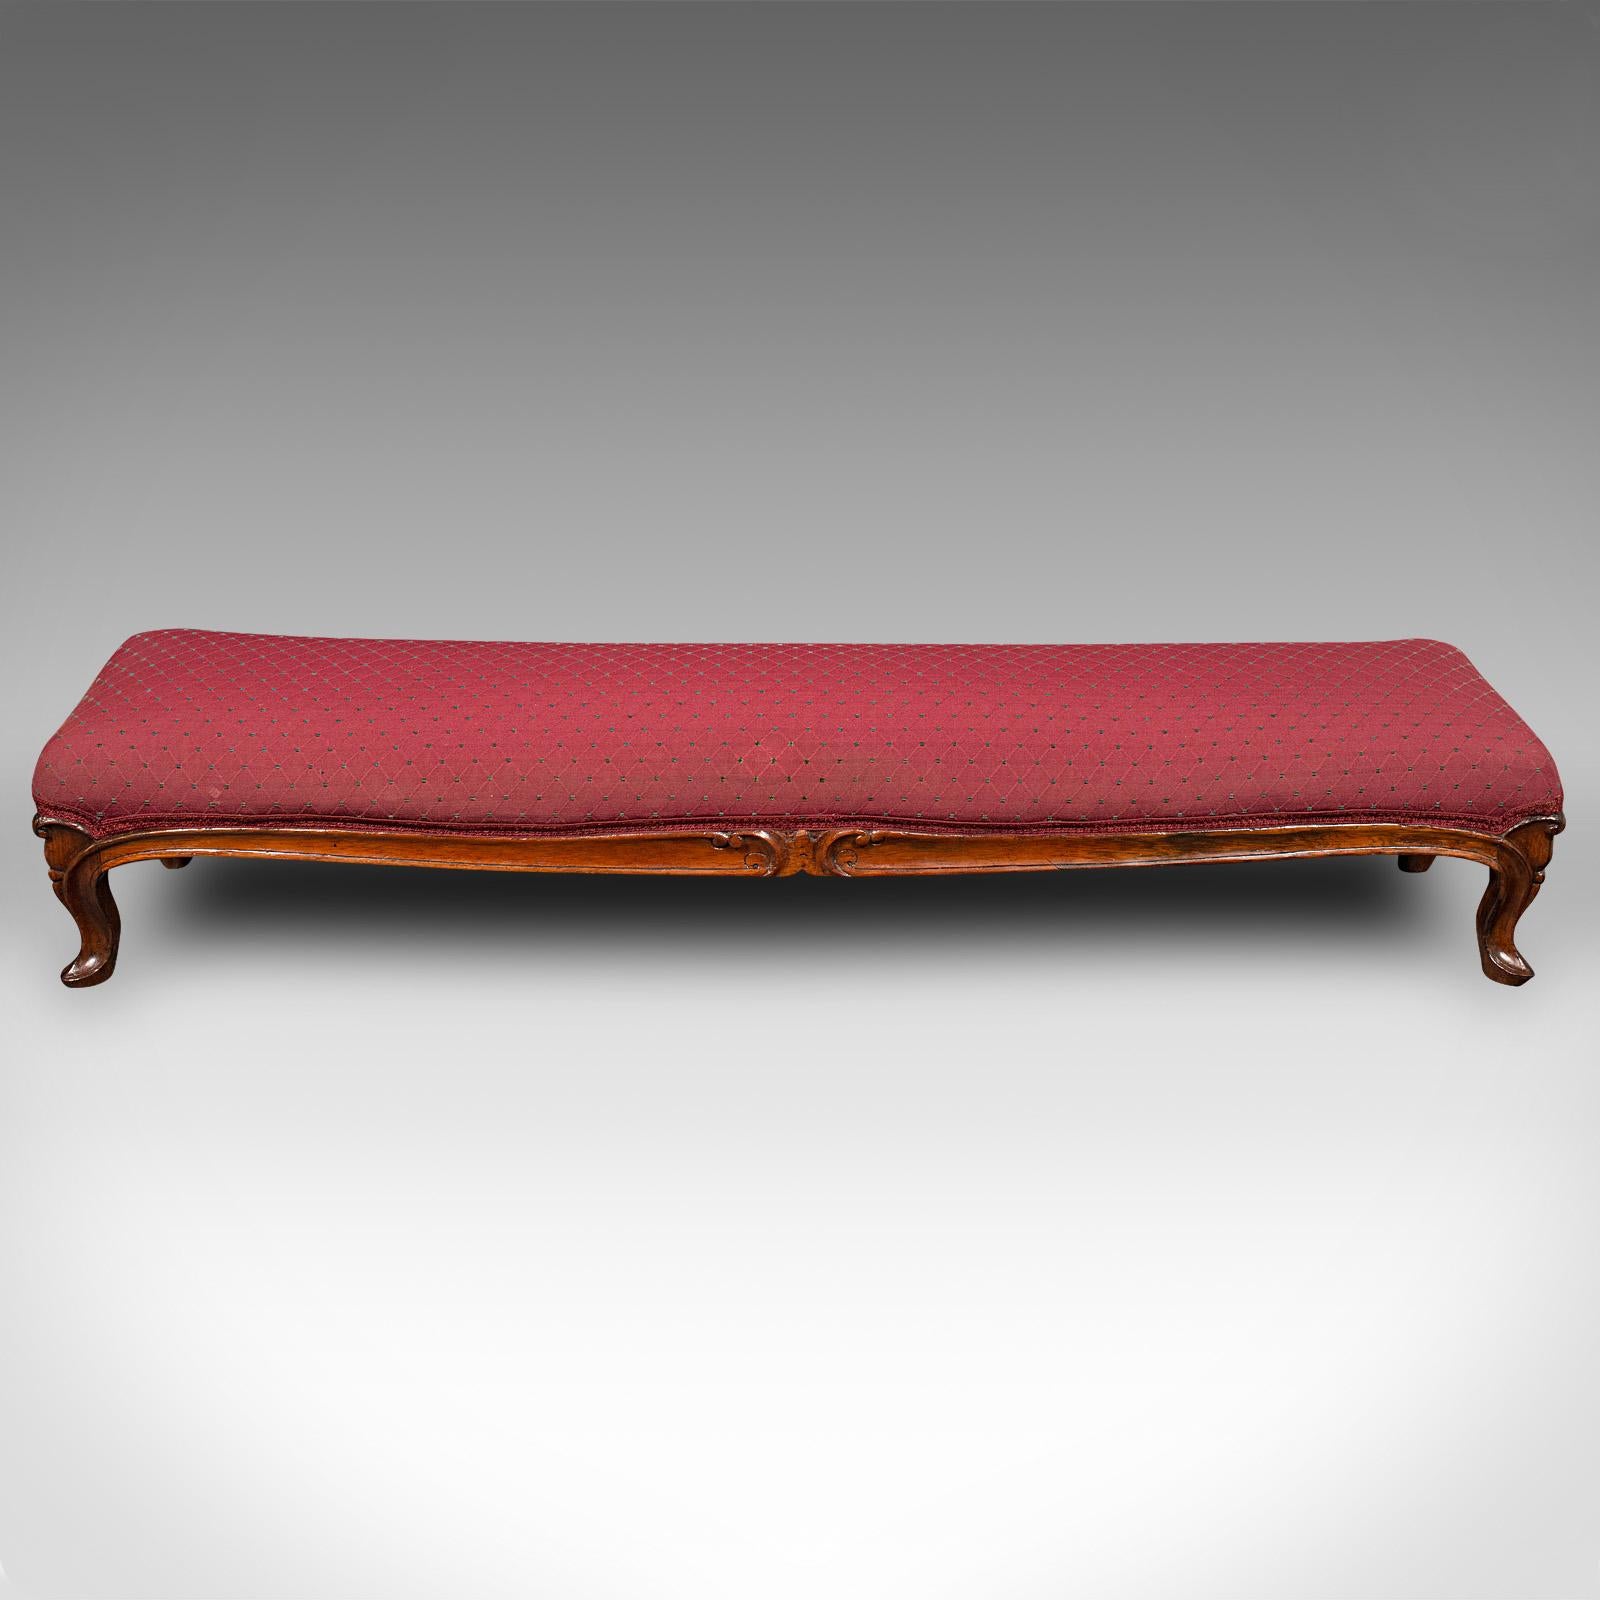 This is an antique carriage stool. An English, walnut and silk cotton raised fireside foot rest, dating to the early Victorian period, circa 1840.

Rest your weary legs on this delightful fireside stool
Displaying a desirable aged patina and in good